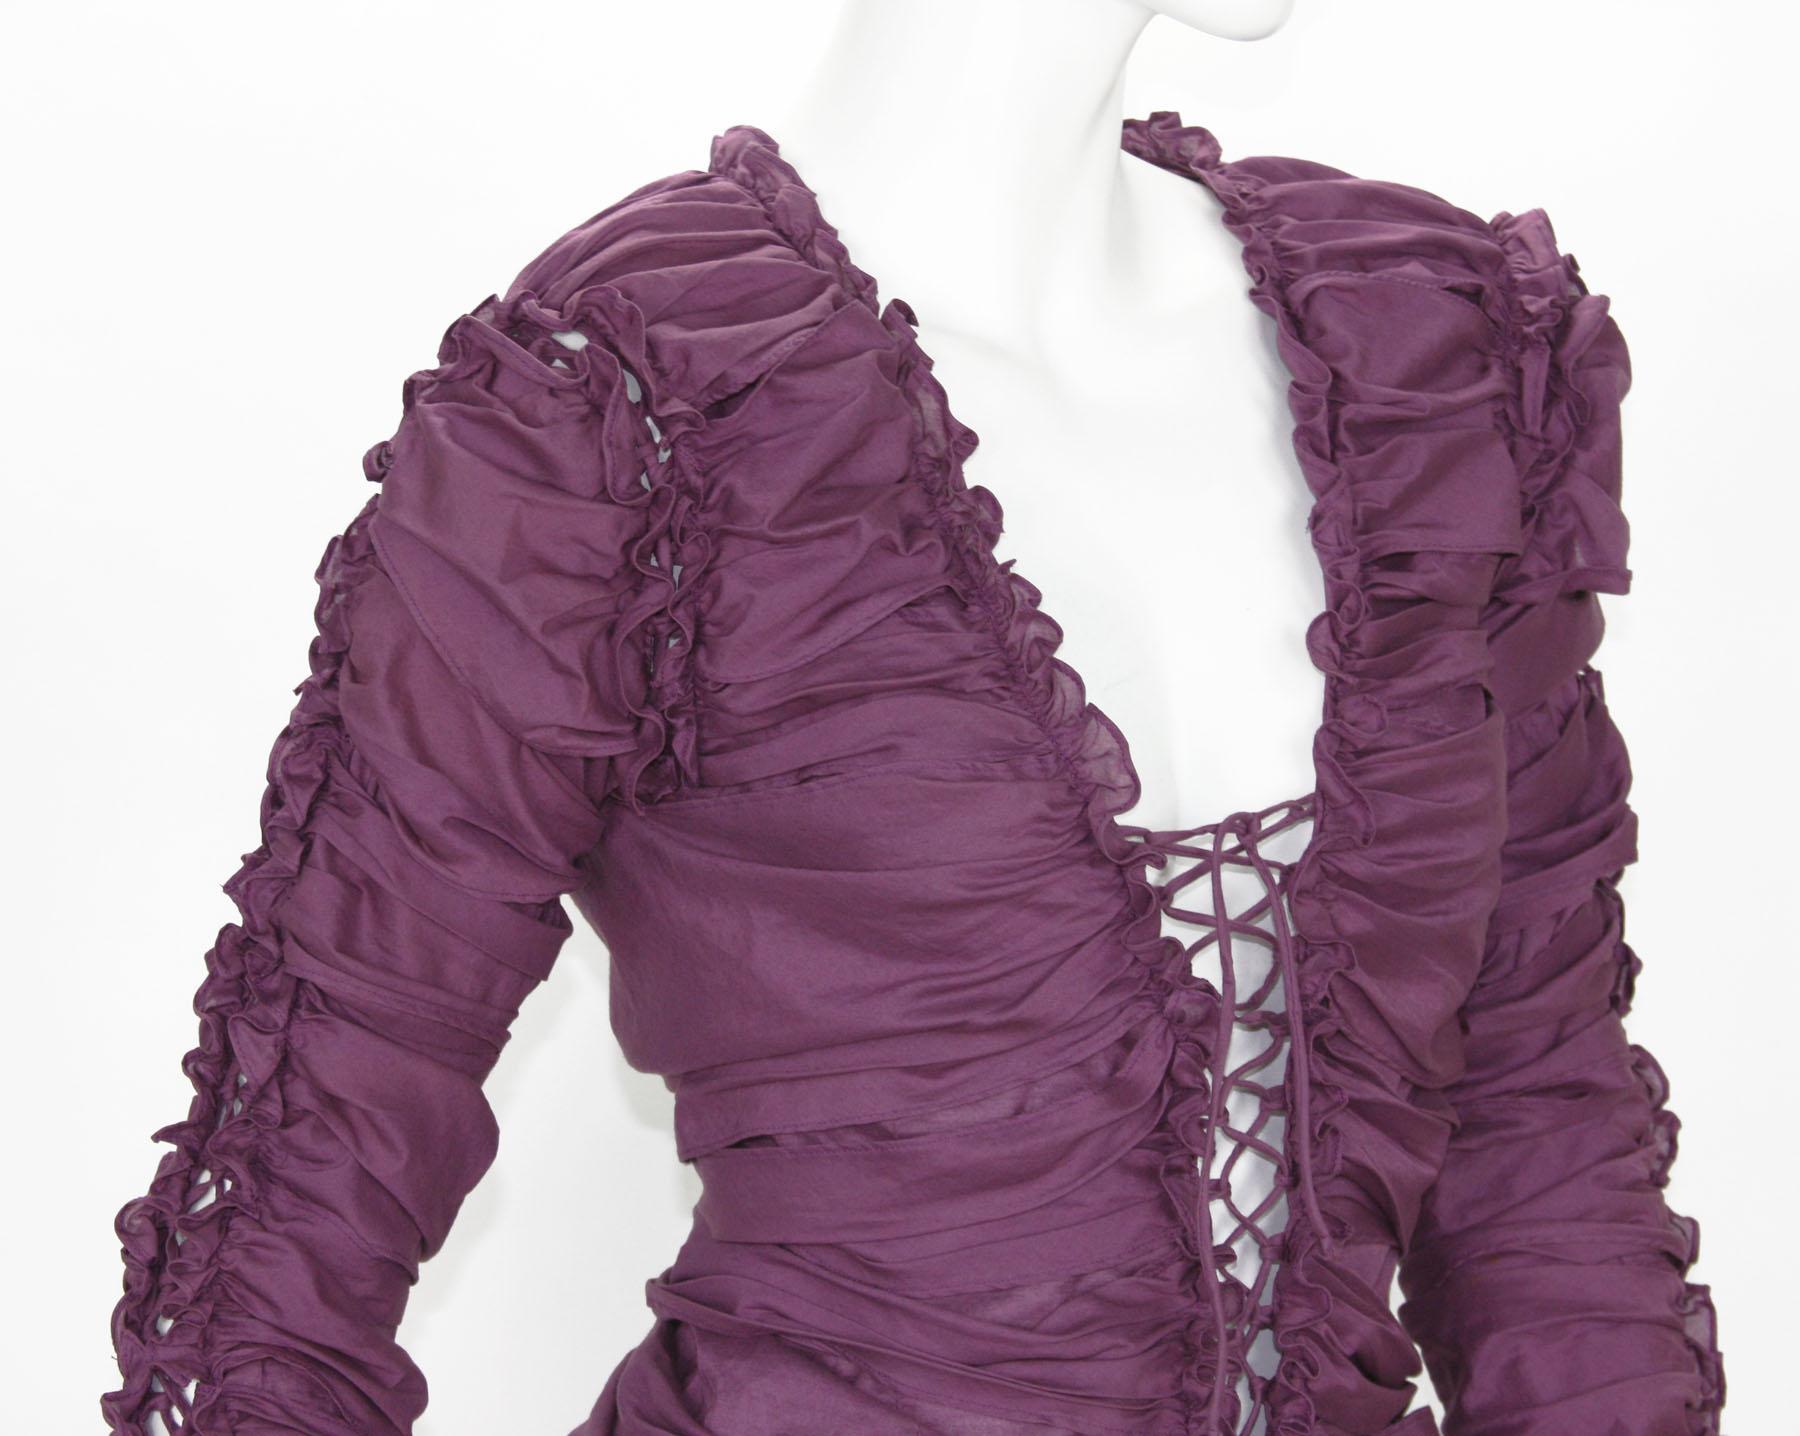 TOM FORD for YVES SAINT LAURENT F/W 2001 Plum Lace-Up Top Blouse Fr 40 - US 6/8 2